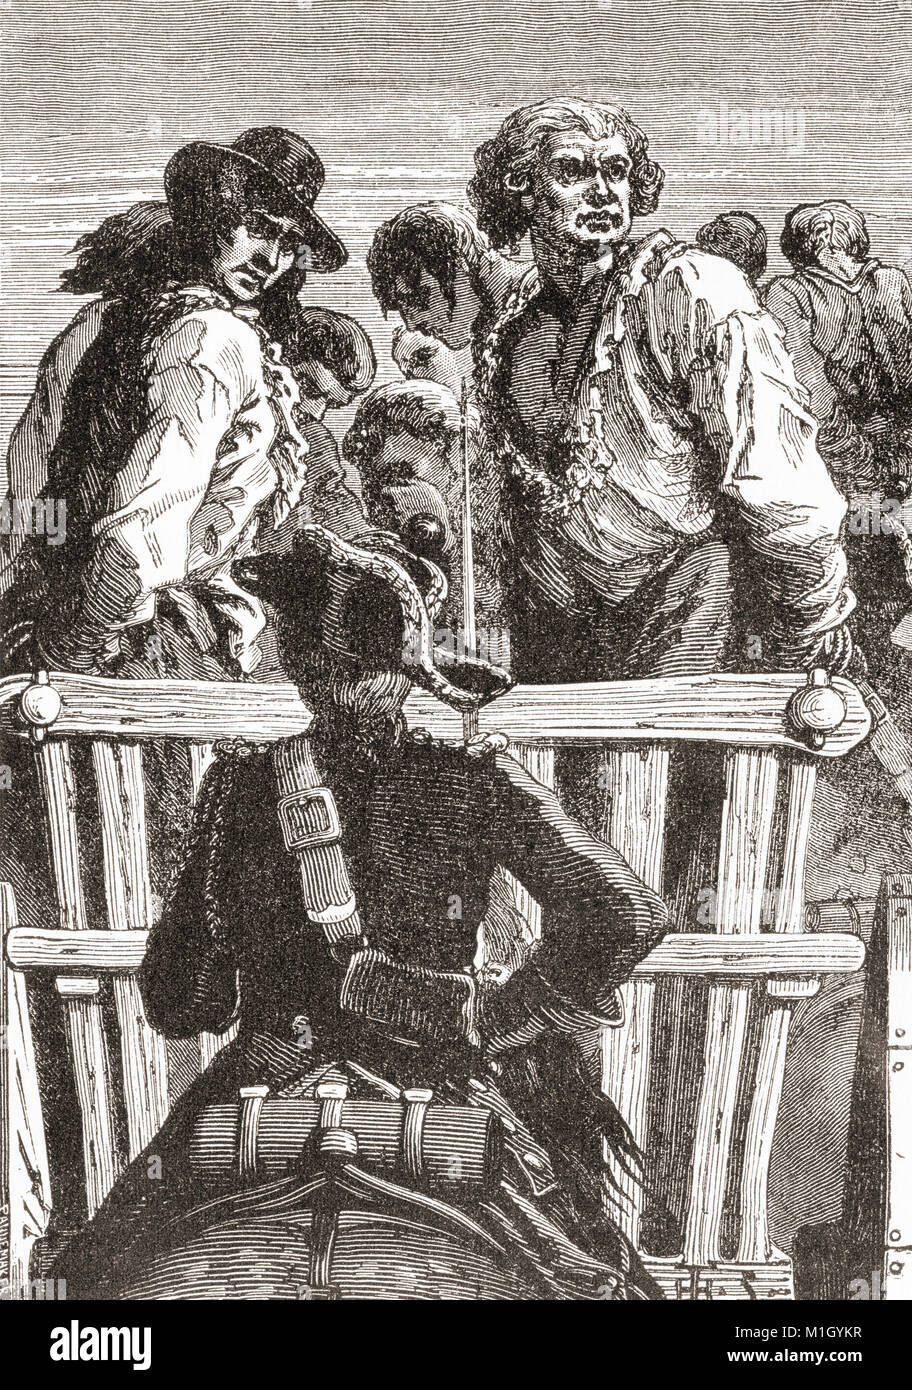 Danton on his way to execution during the French Revolution.  Georges Jacques Danton, 1759 –  1794.  Leading figure in the early stages of the French Revolution, in particular as the first president of the Committee of Public Safety.  From Ward and Lock's Illustrated History of the World, published c.1882. Stock Photo